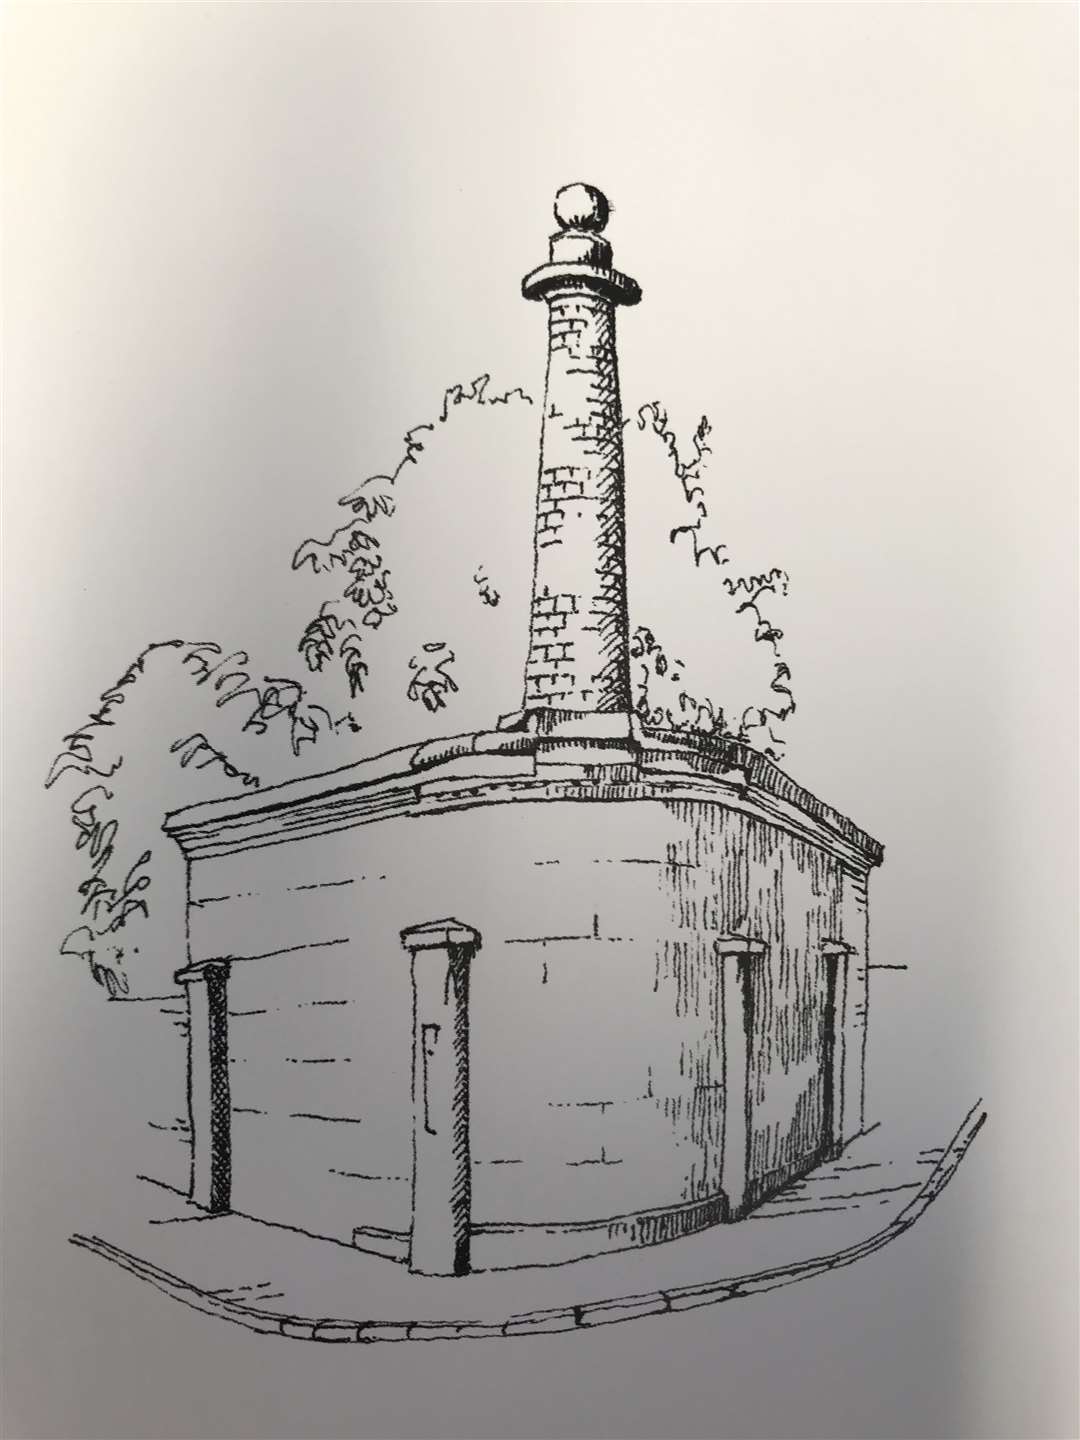 A sketch of Treanor's watchtower from 'Deal & Walmer - A celebration' by Tom Burnham and Gregory Holyoake